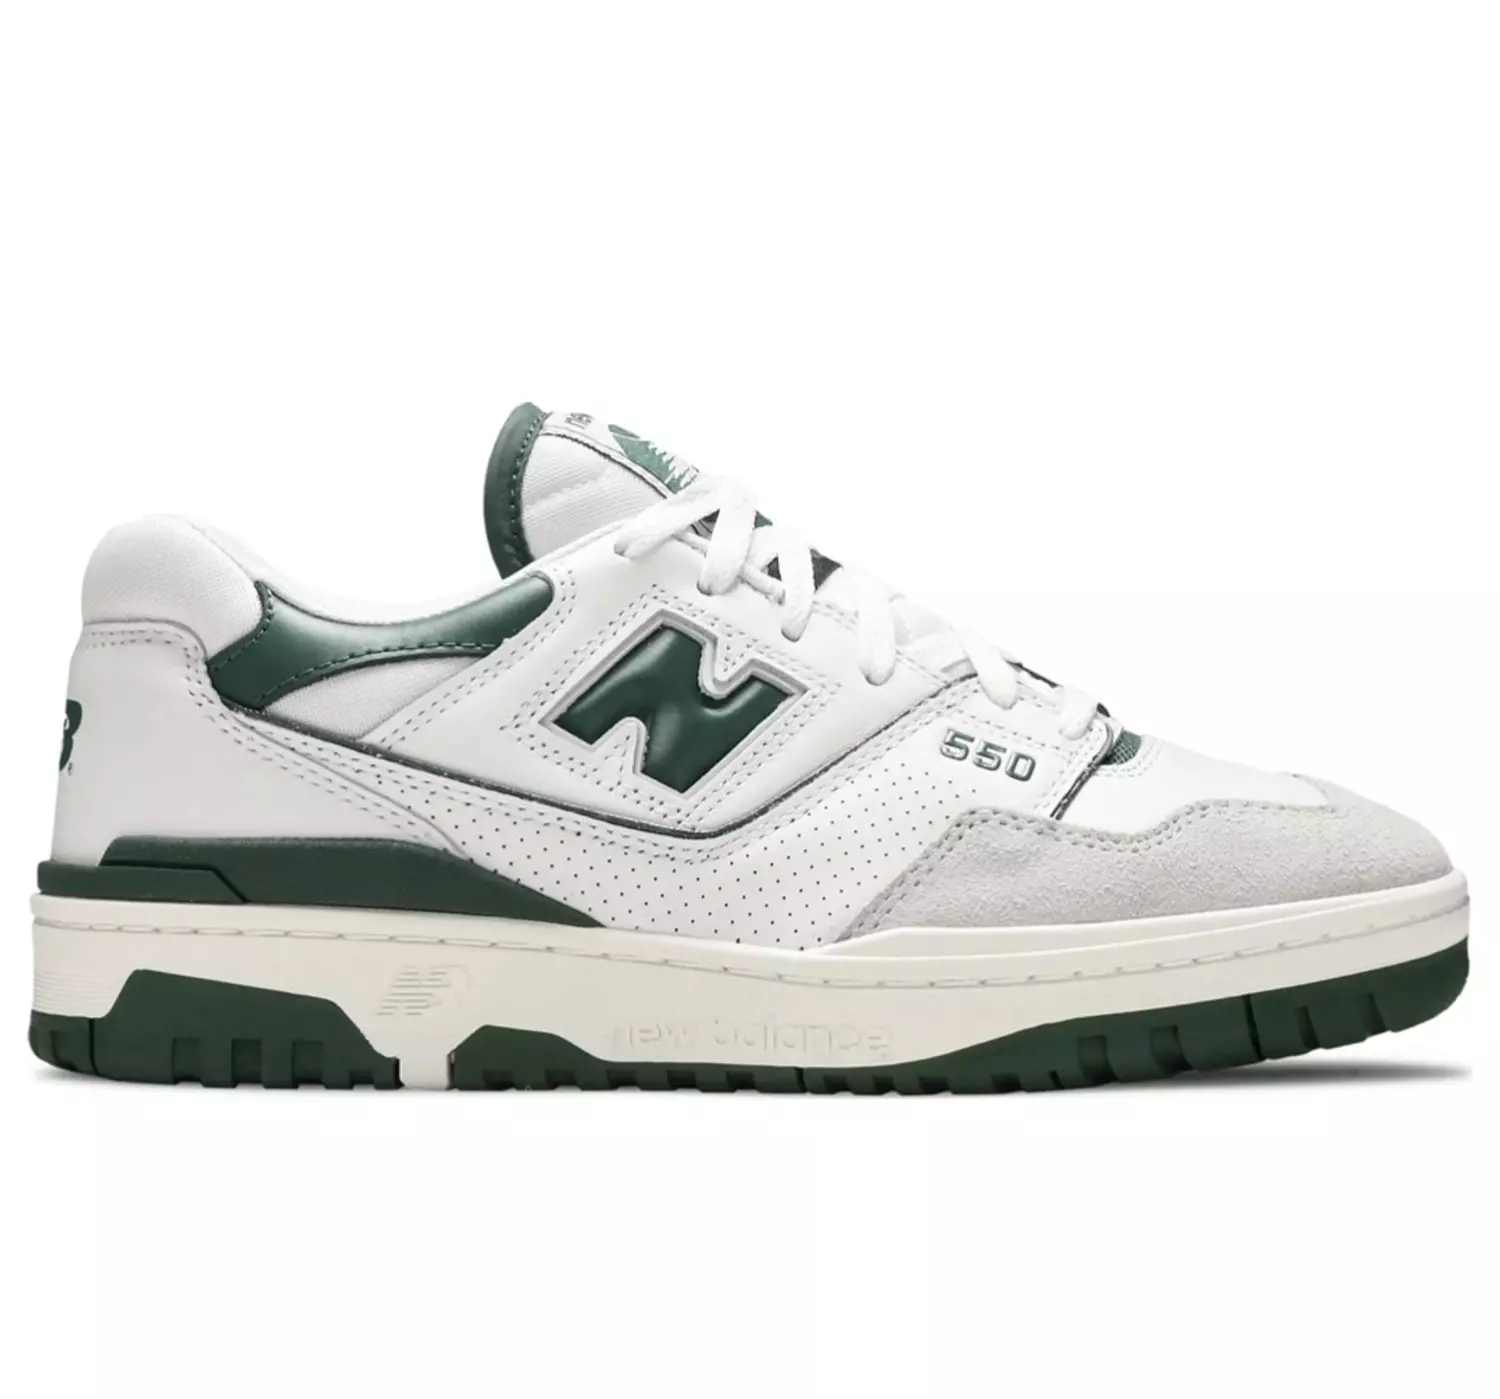 New Balance 550 “White-Green” hover image